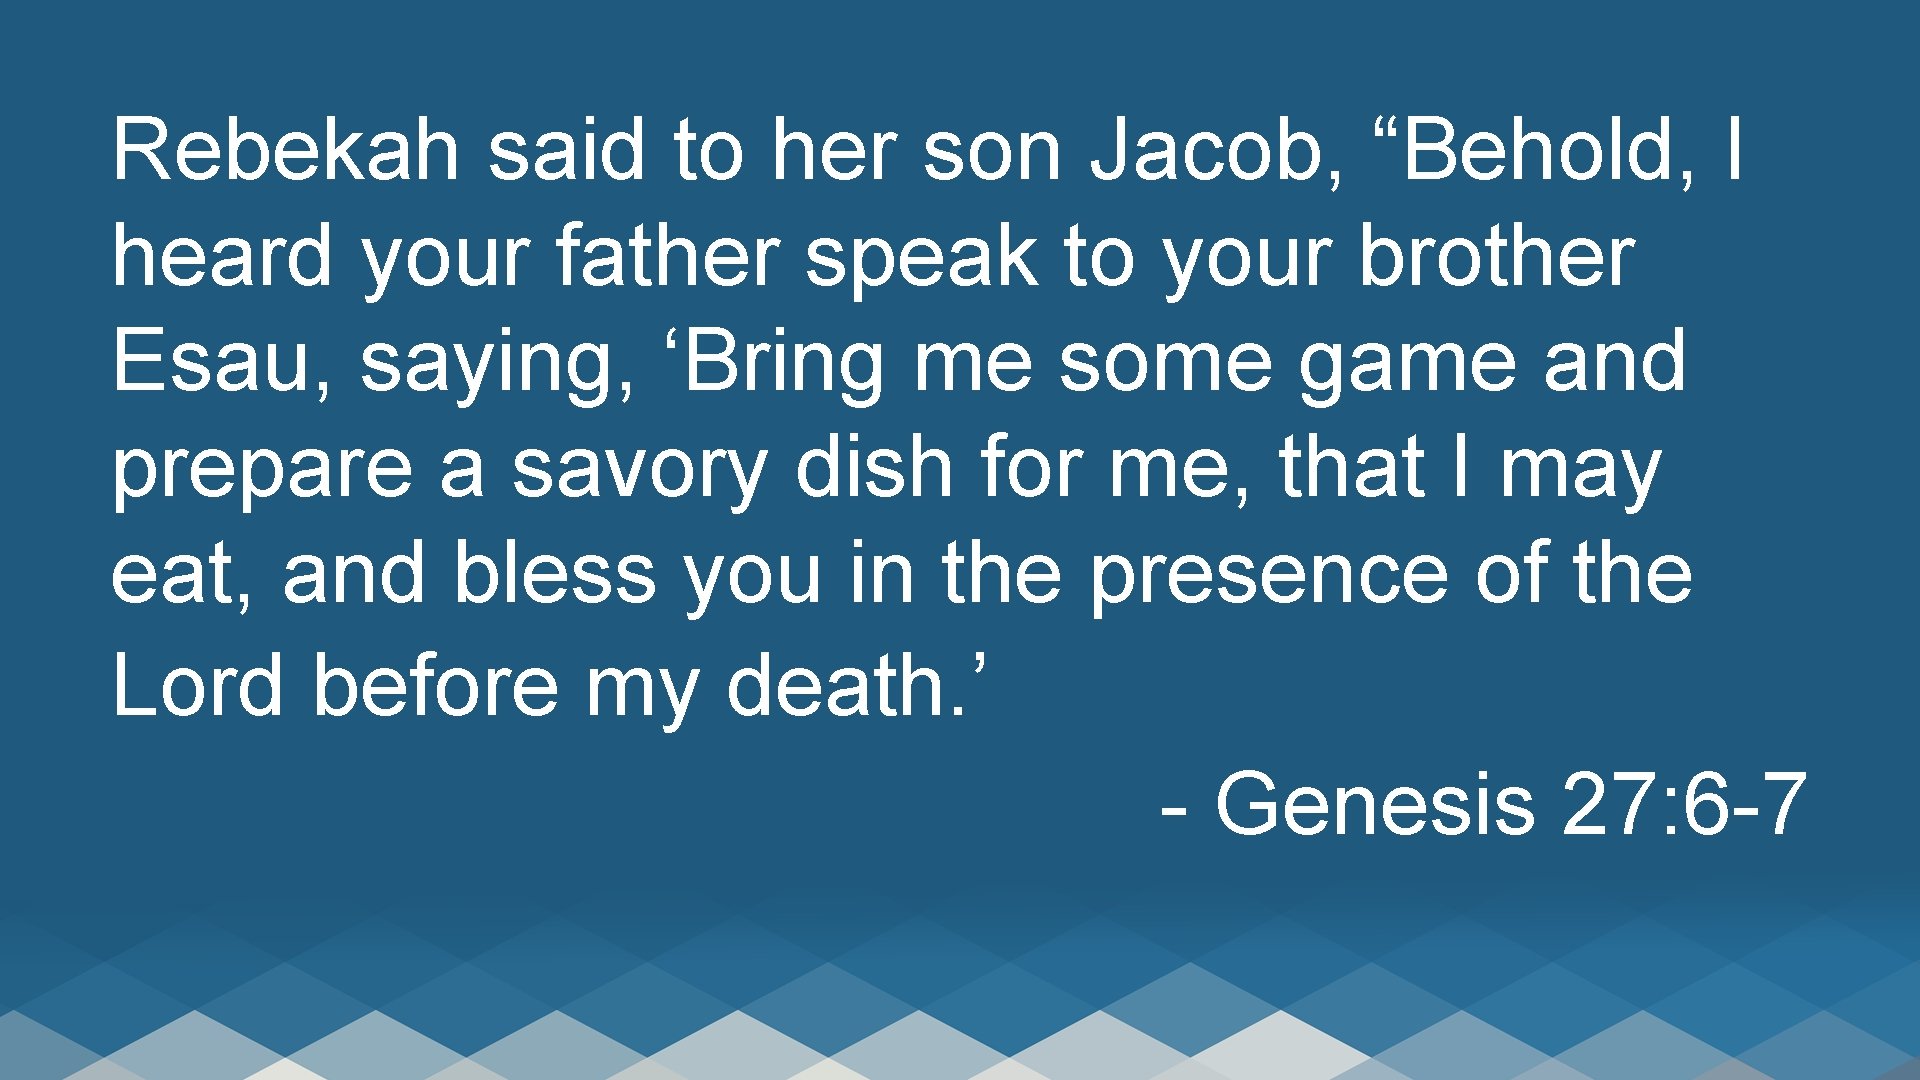 Rebekah said to her son Jacob, “Behold, I heard your father speak to your